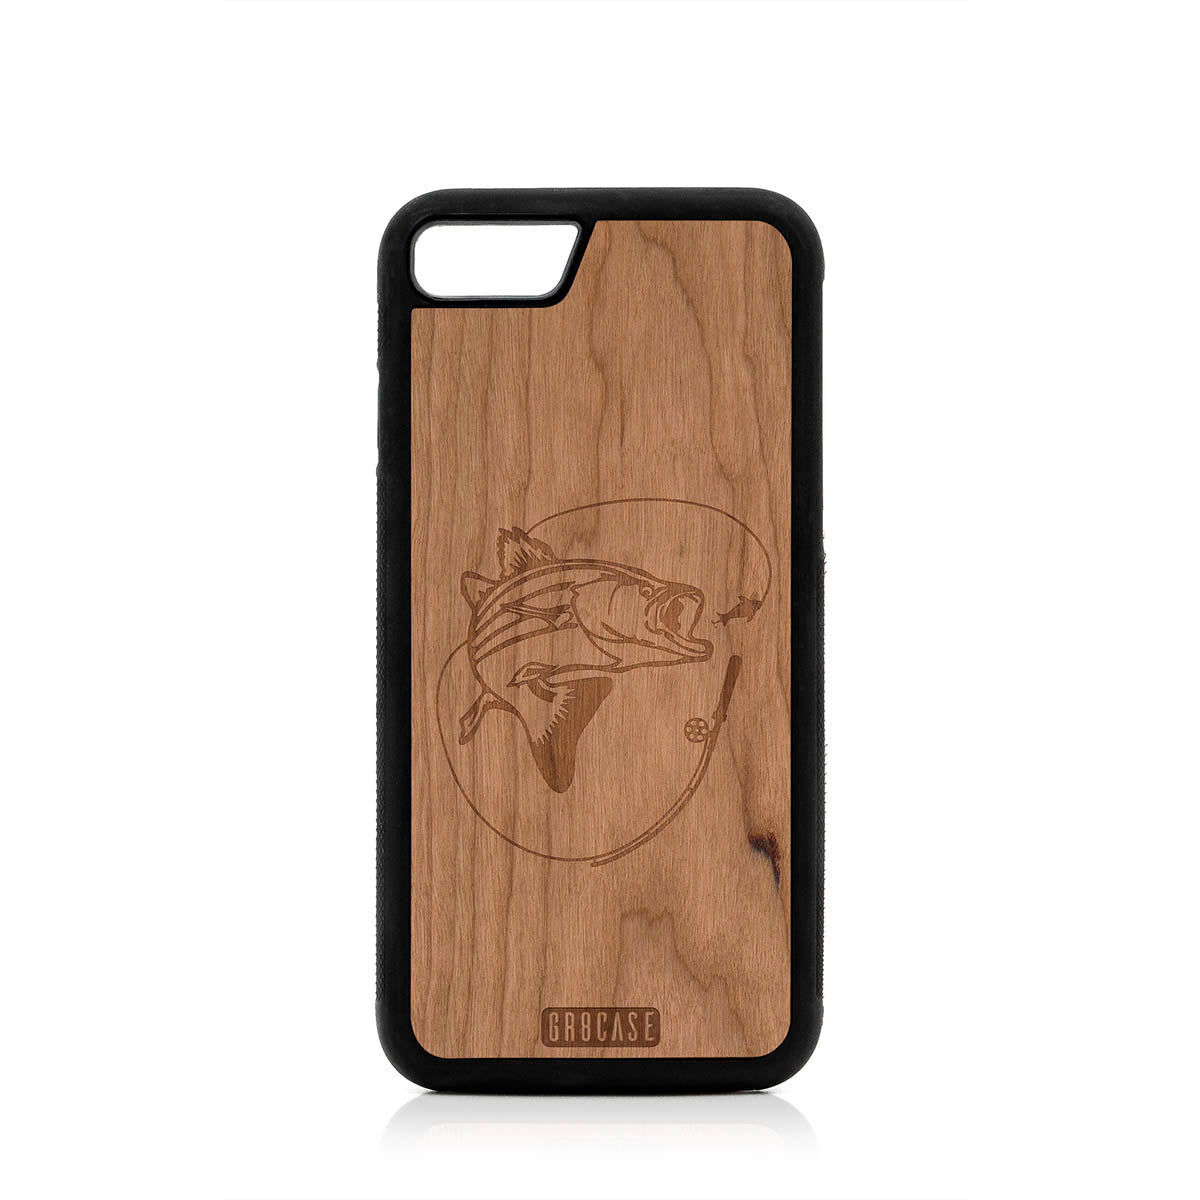 Fish and Reel Design Wood Case For iPhone 7/8 by GR8CASE